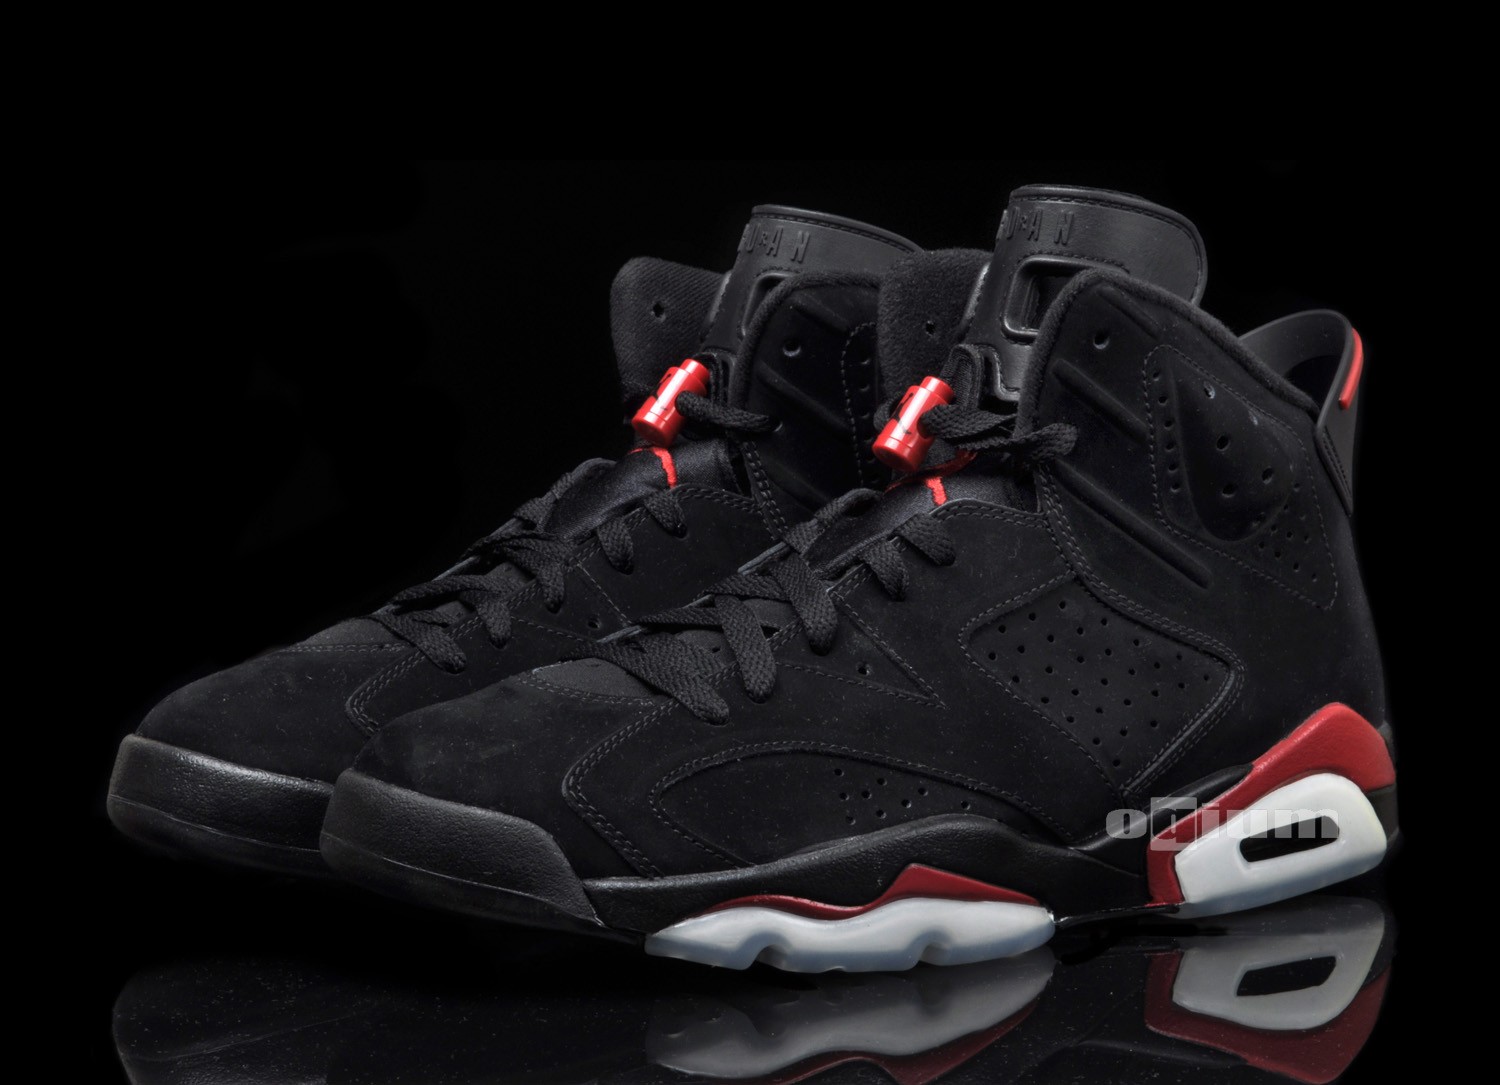 Rugged Style Nike Air Jordan 6 probably the coolest